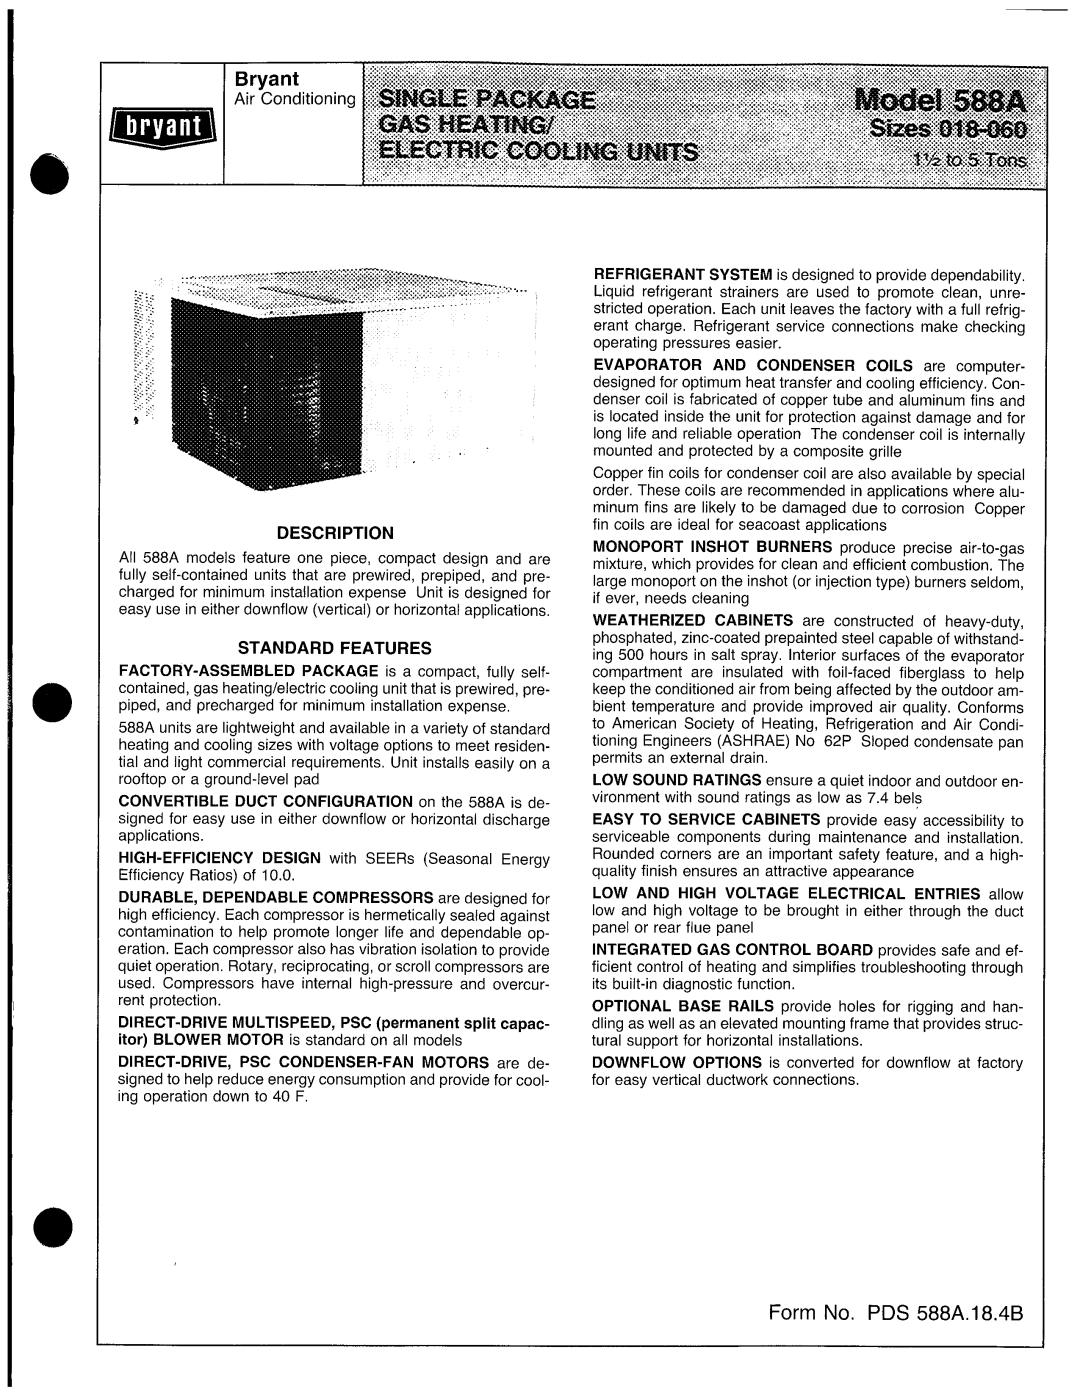 Bryant 589A user manual Contents, II. Start Up Heating Section and, III. Start Up Cooling Section and, General, 588A 